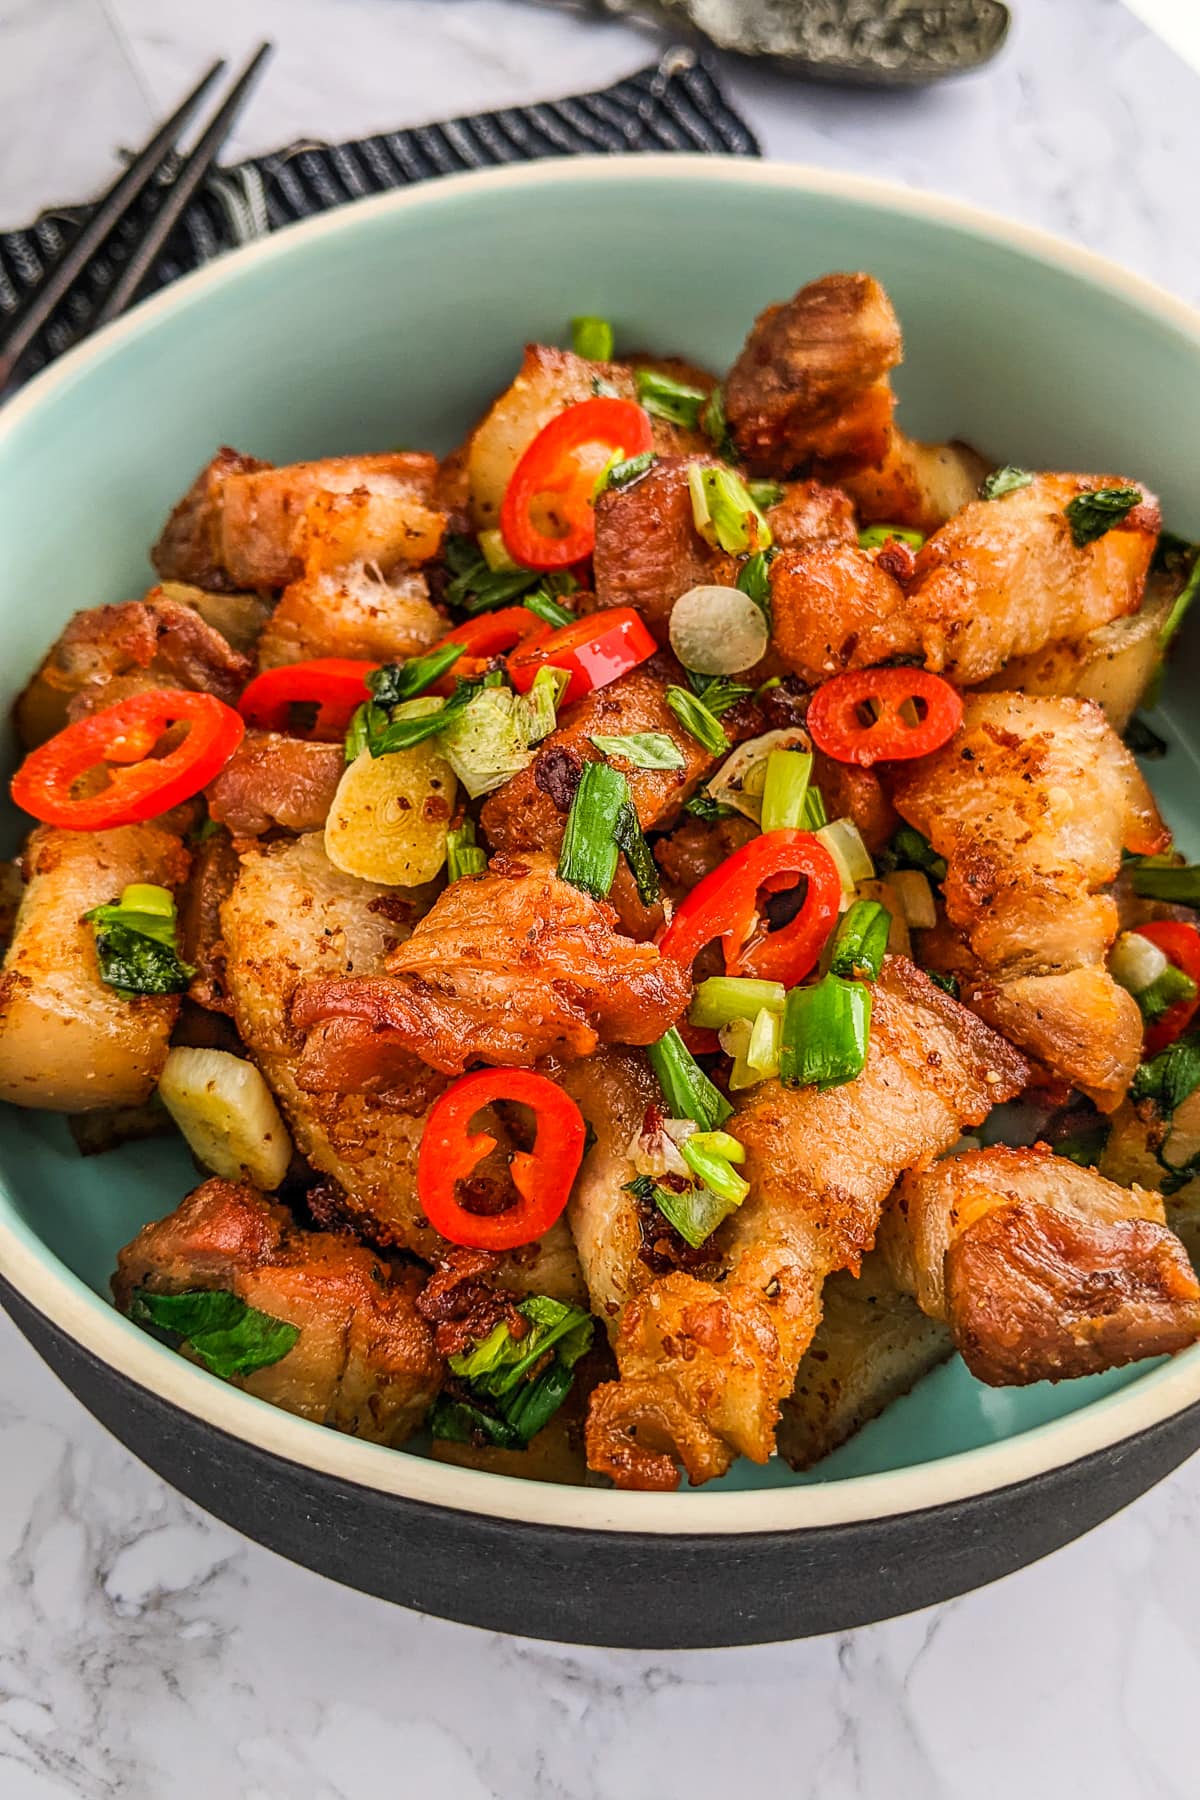 Pork belly with spring onions, chili pepper and garlic.